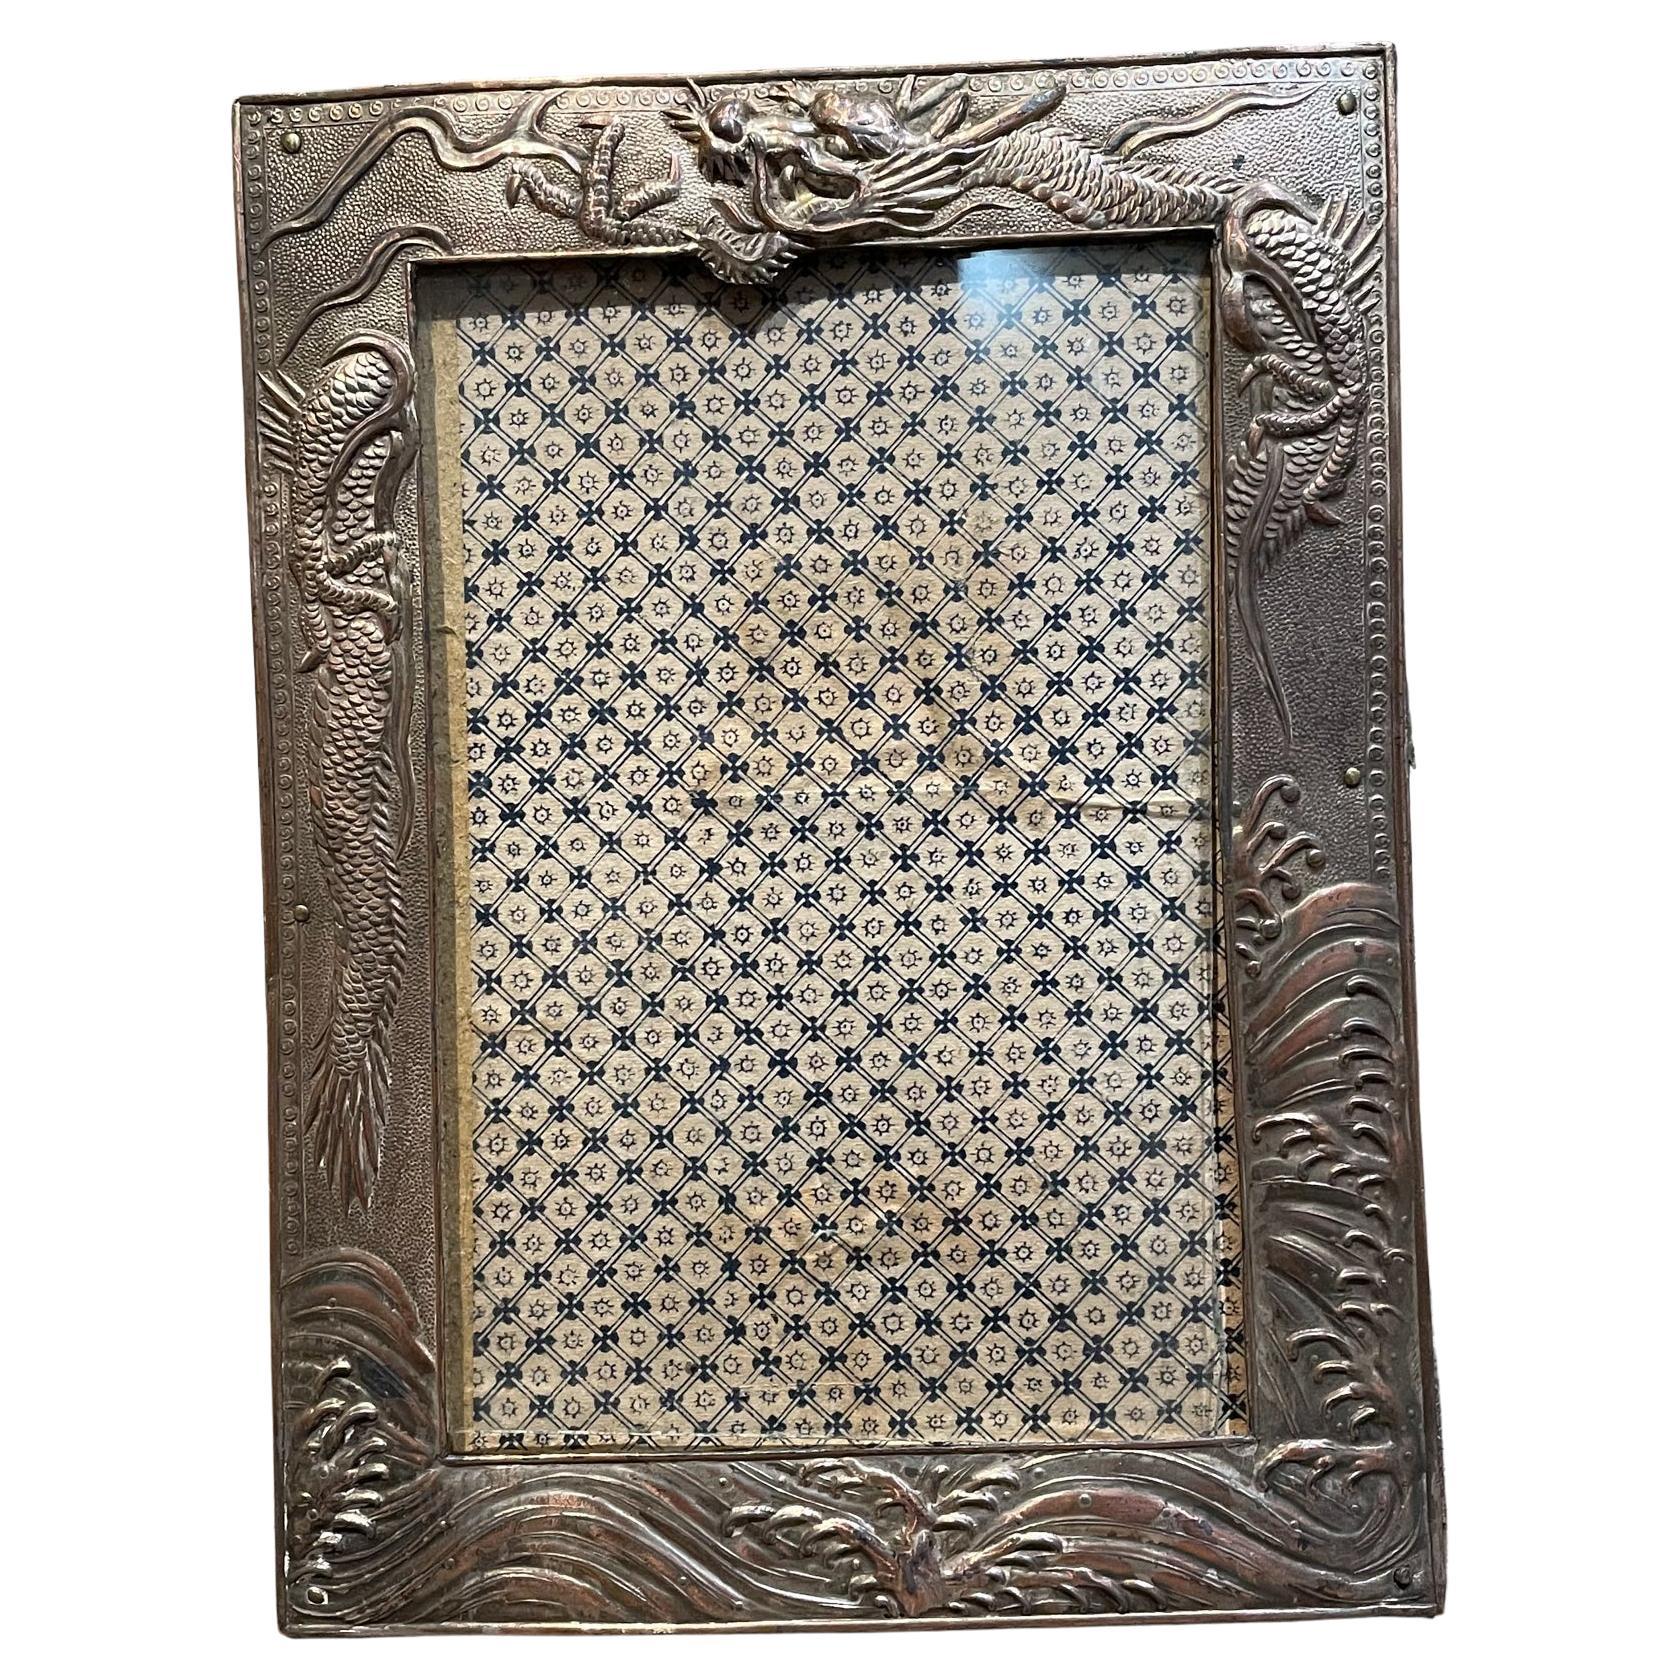 
1940s Antique Silver Nickel Photo Picture Frame
Stand up kick plate
Embellished Border design dragon serpent motif
7H x 5.25W .25D inches
Original Vintage Preowned Condition.
Refer to images.